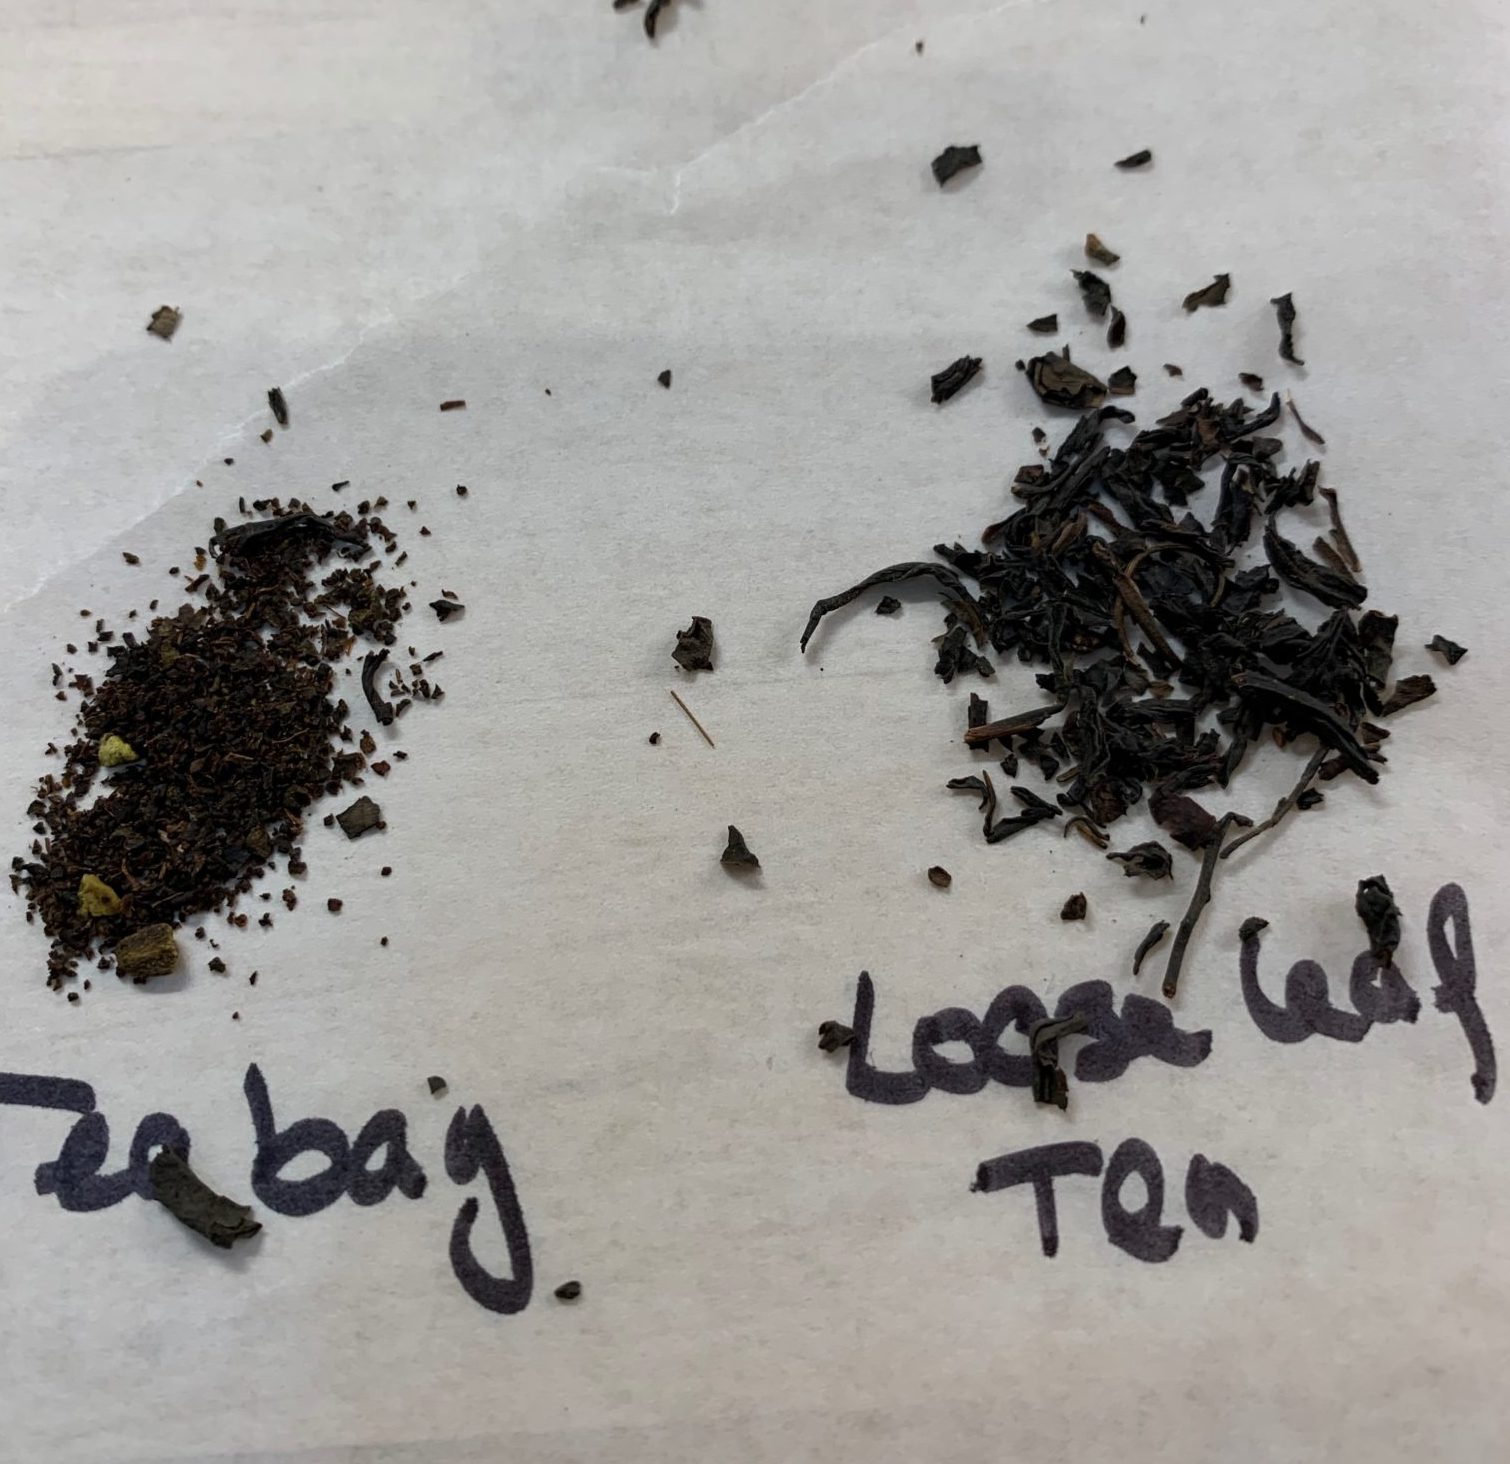 Showing the difference between tea used in a tea bag and loose leaf tea